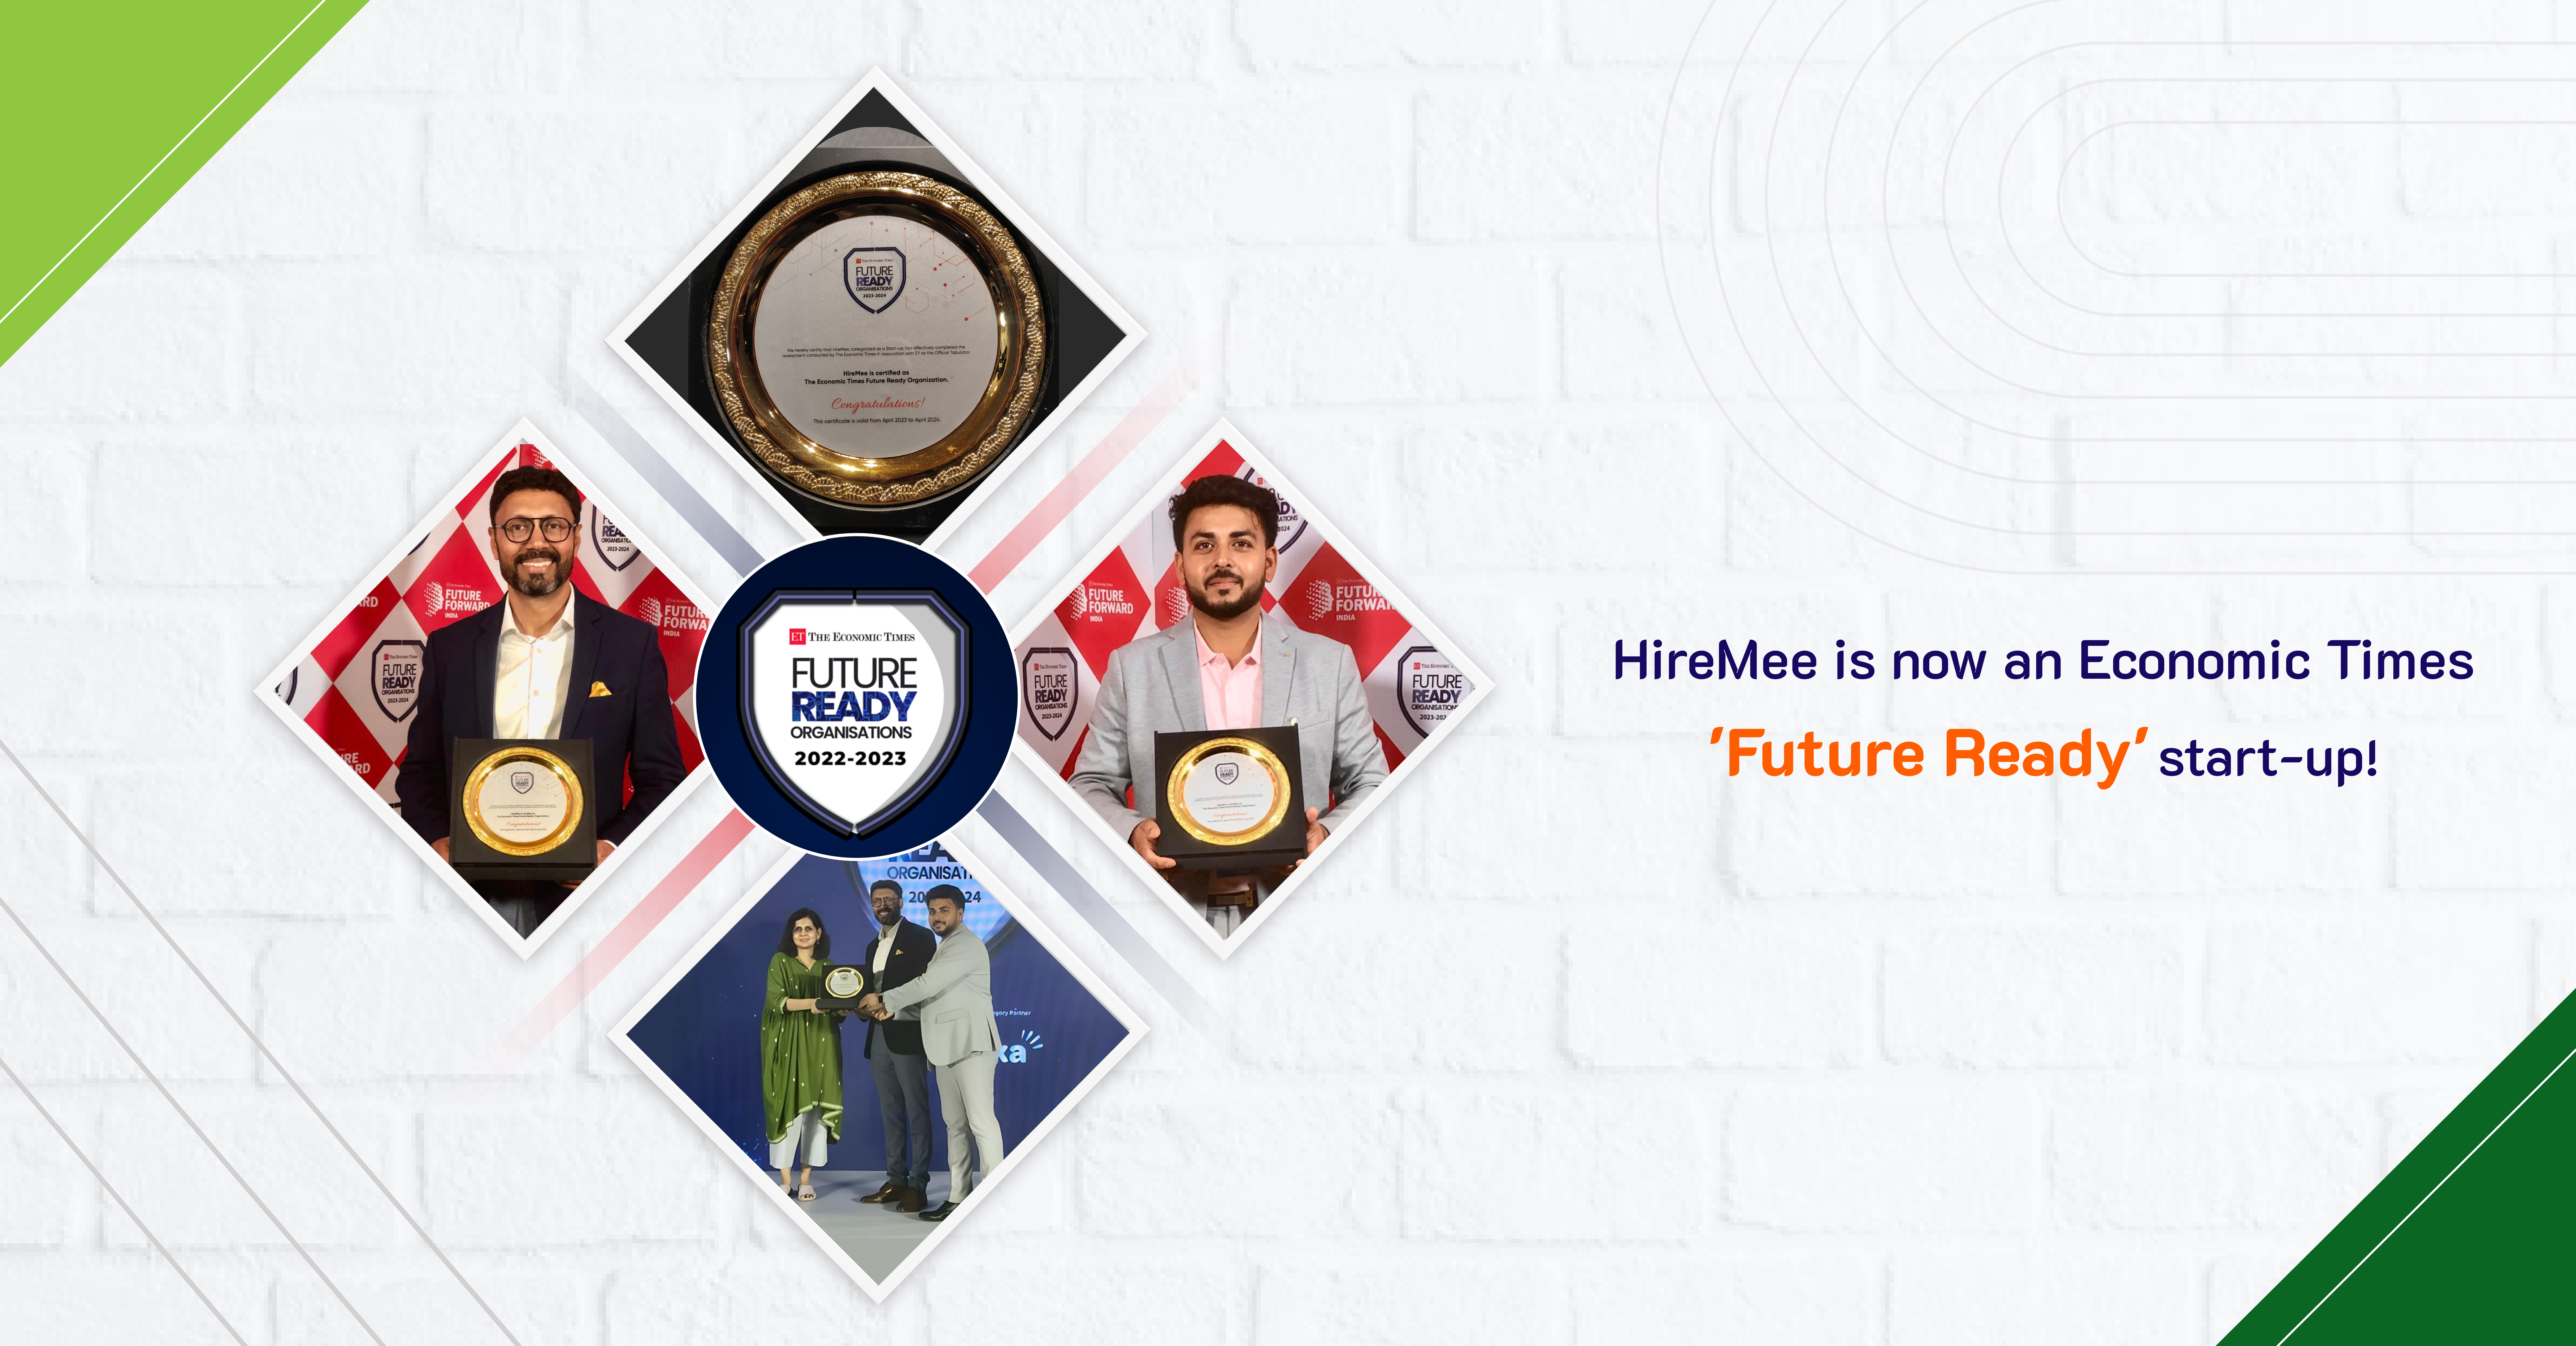 HireMee bags the ‘Future Ready’ award under the ‘Start-up’ category